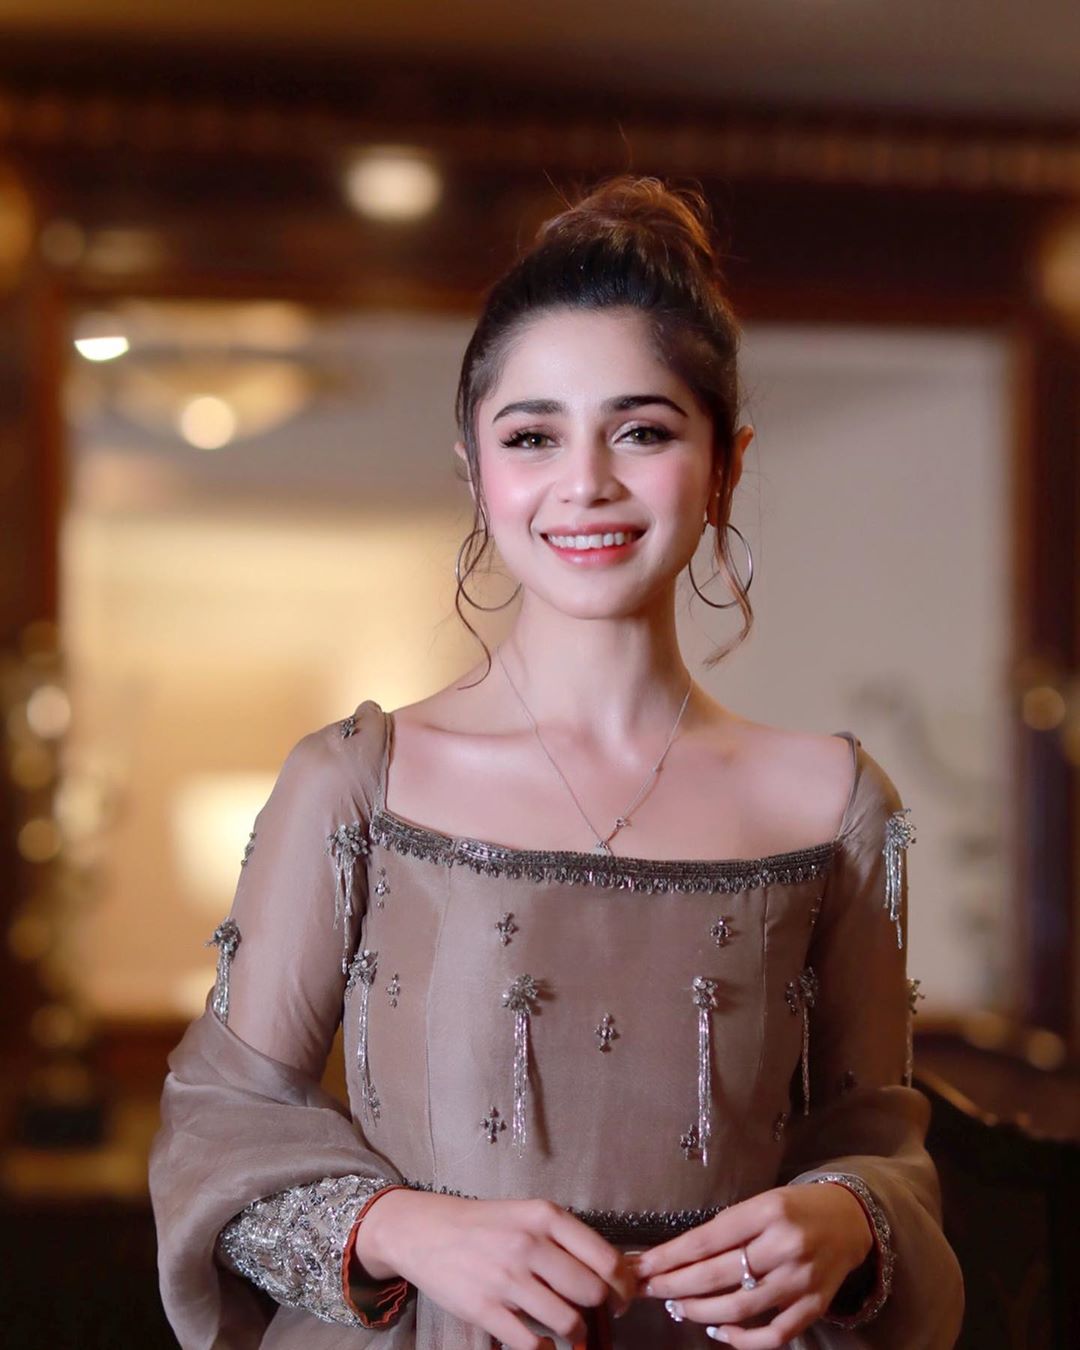 Beautiful Singer Aima Baig Looks Gorgeous in this Dress